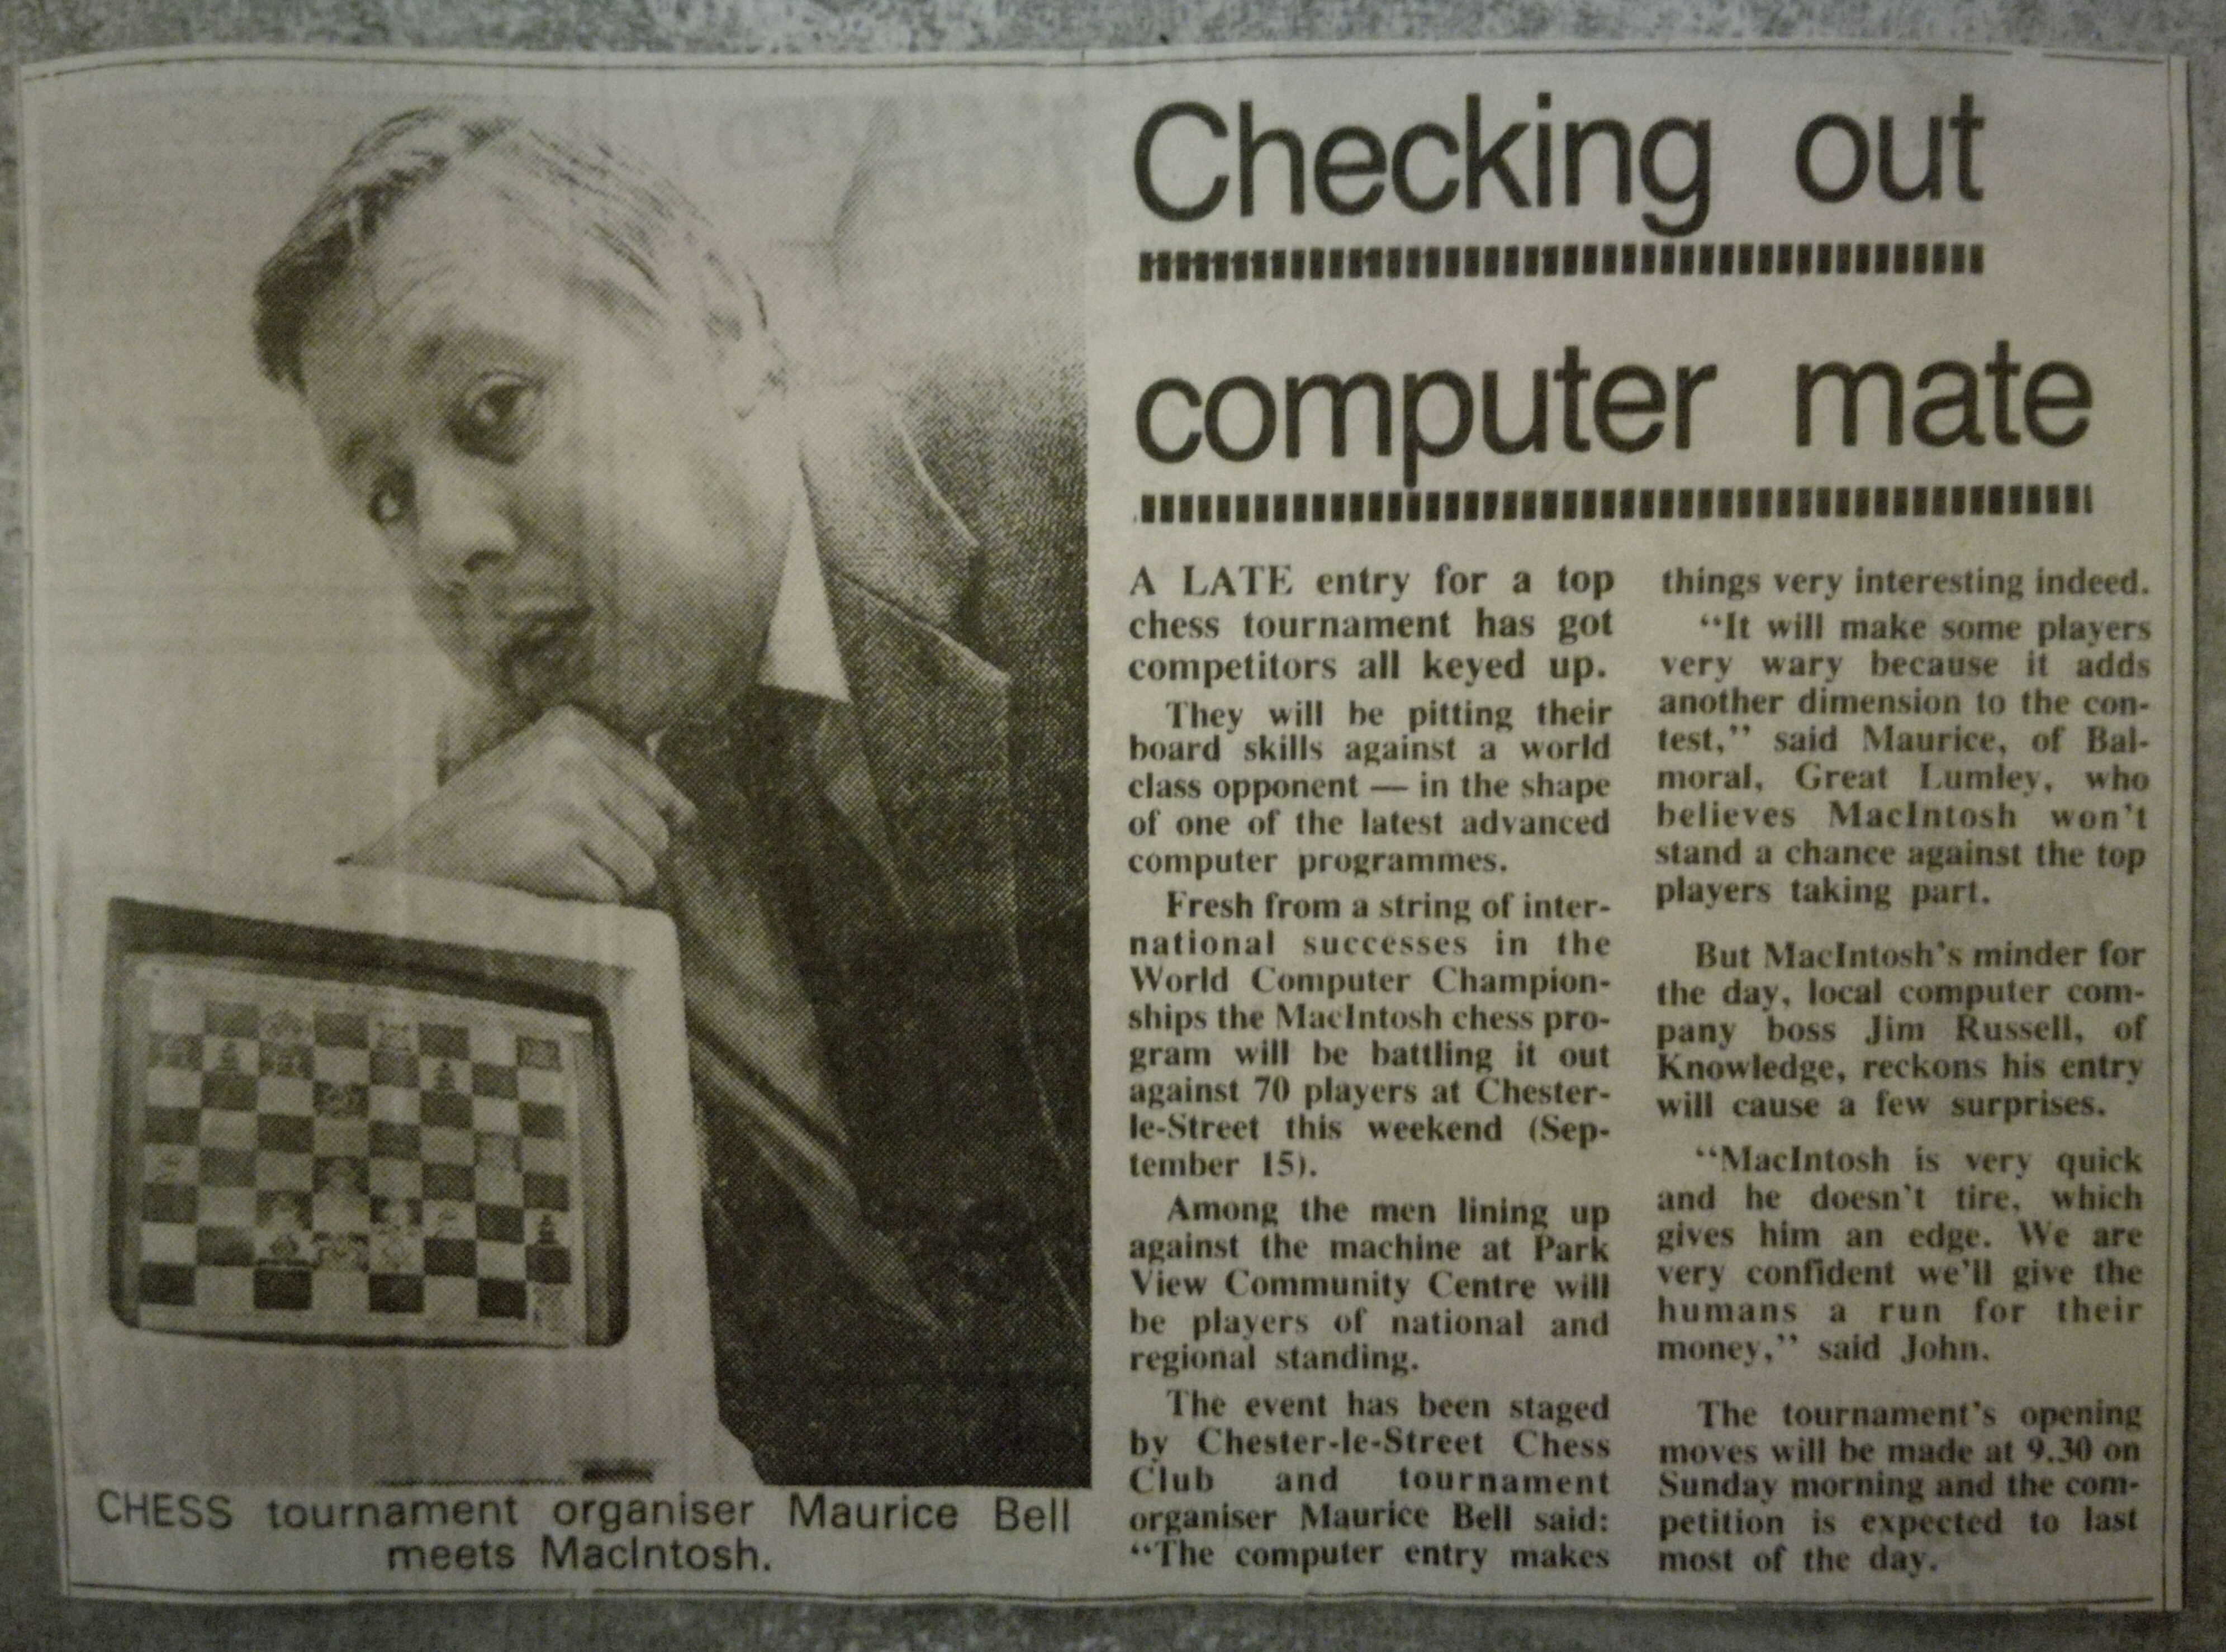 Maurice Bell organising Chess Tournament with (Apple) MacIntosh Chess Computer entry